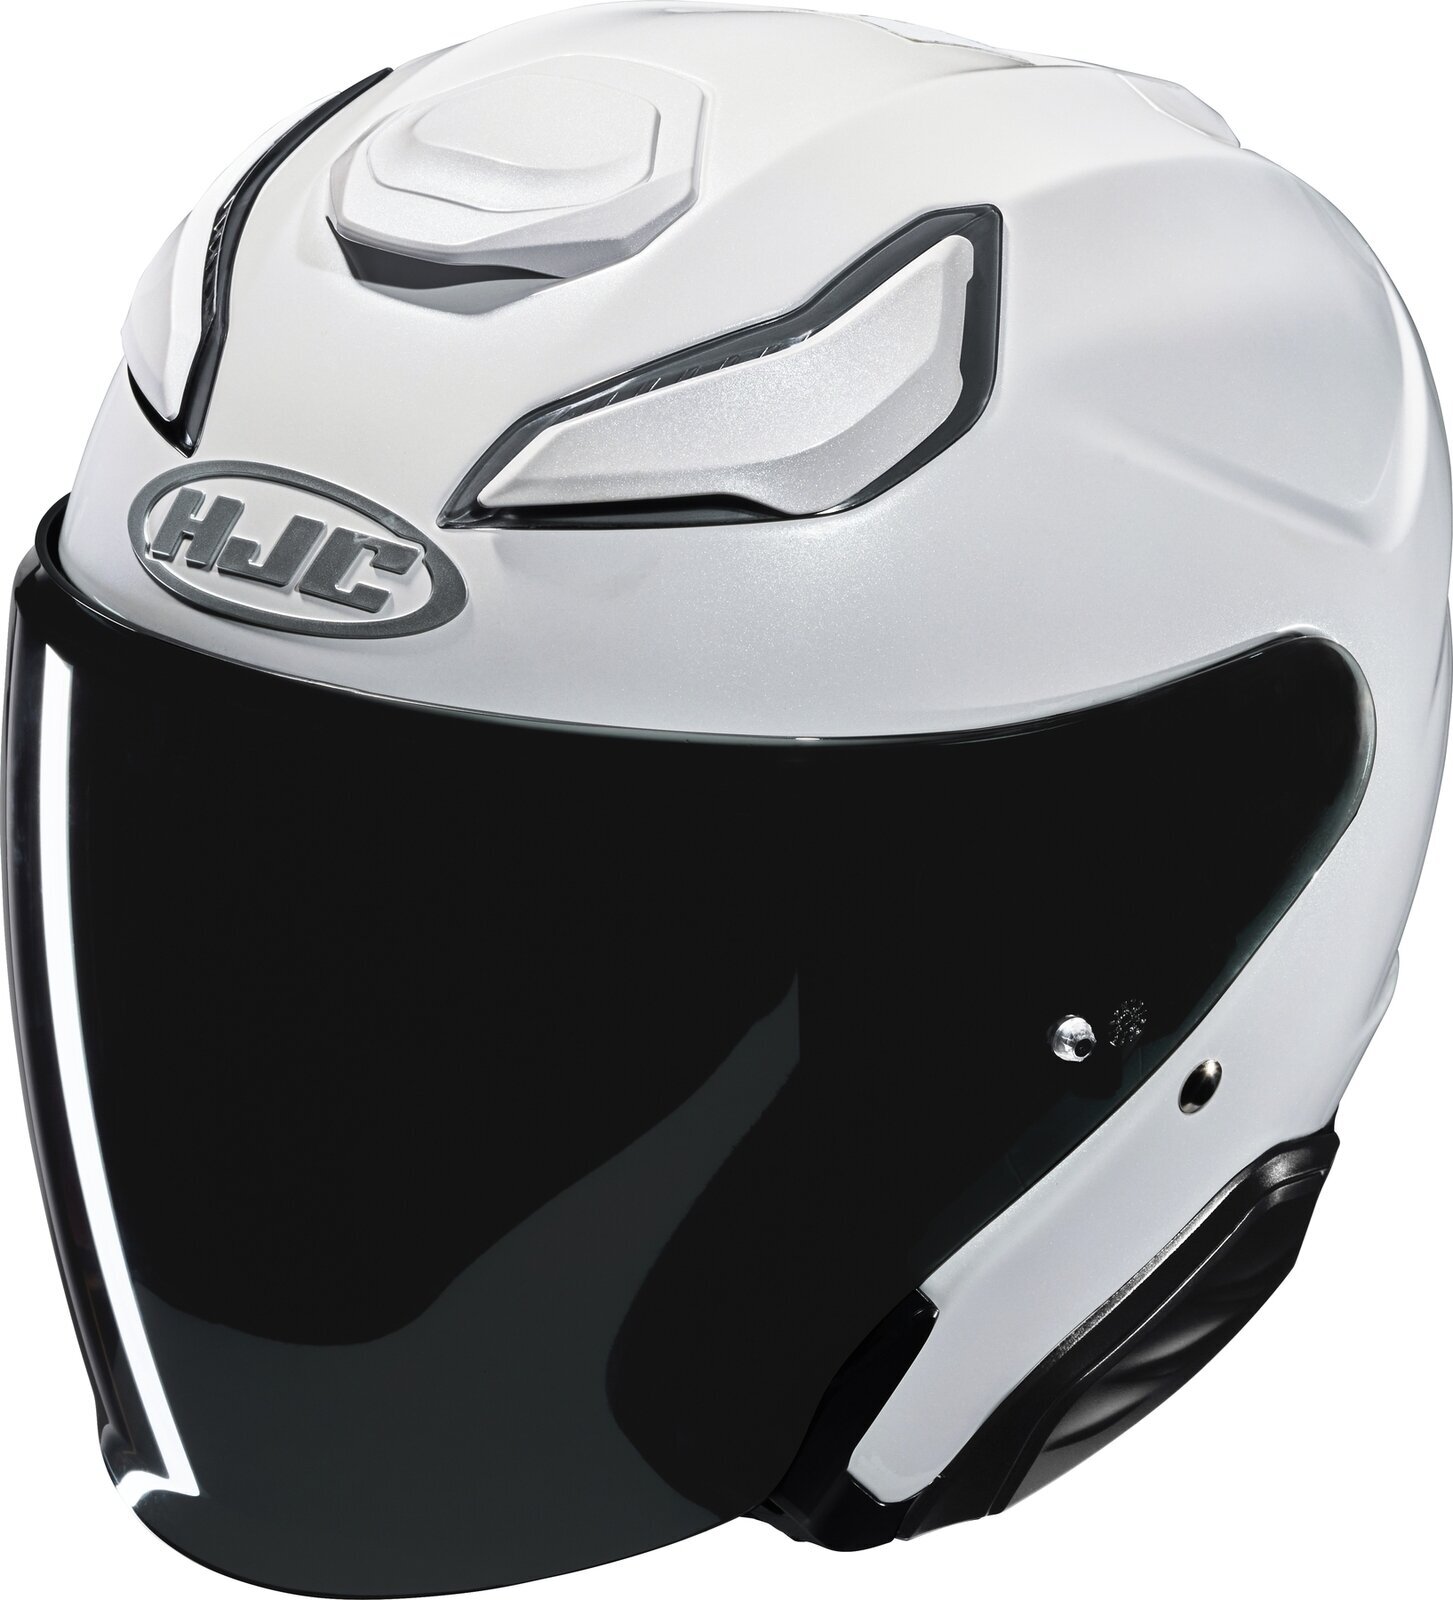 Helm HJC F31 Solid Pearl White XS Helm